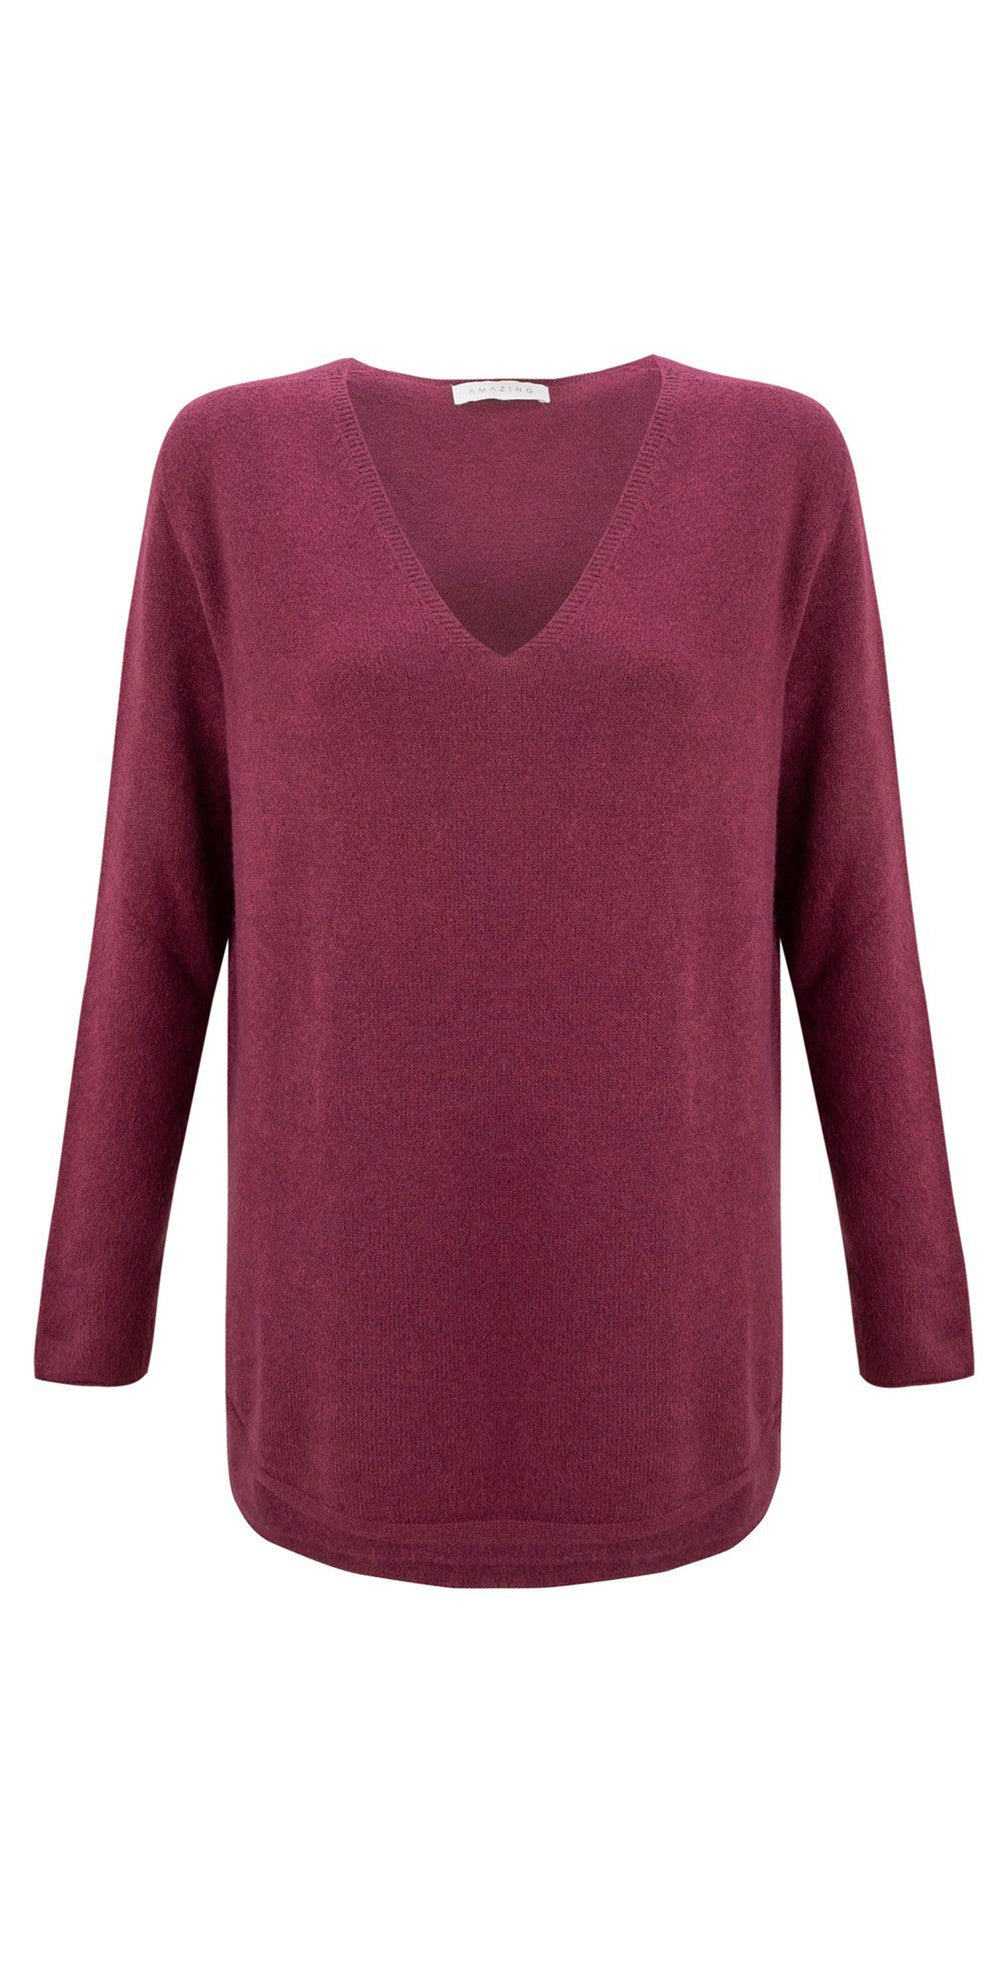 Amazing Woman Perrie Mulberry Purple Jumper